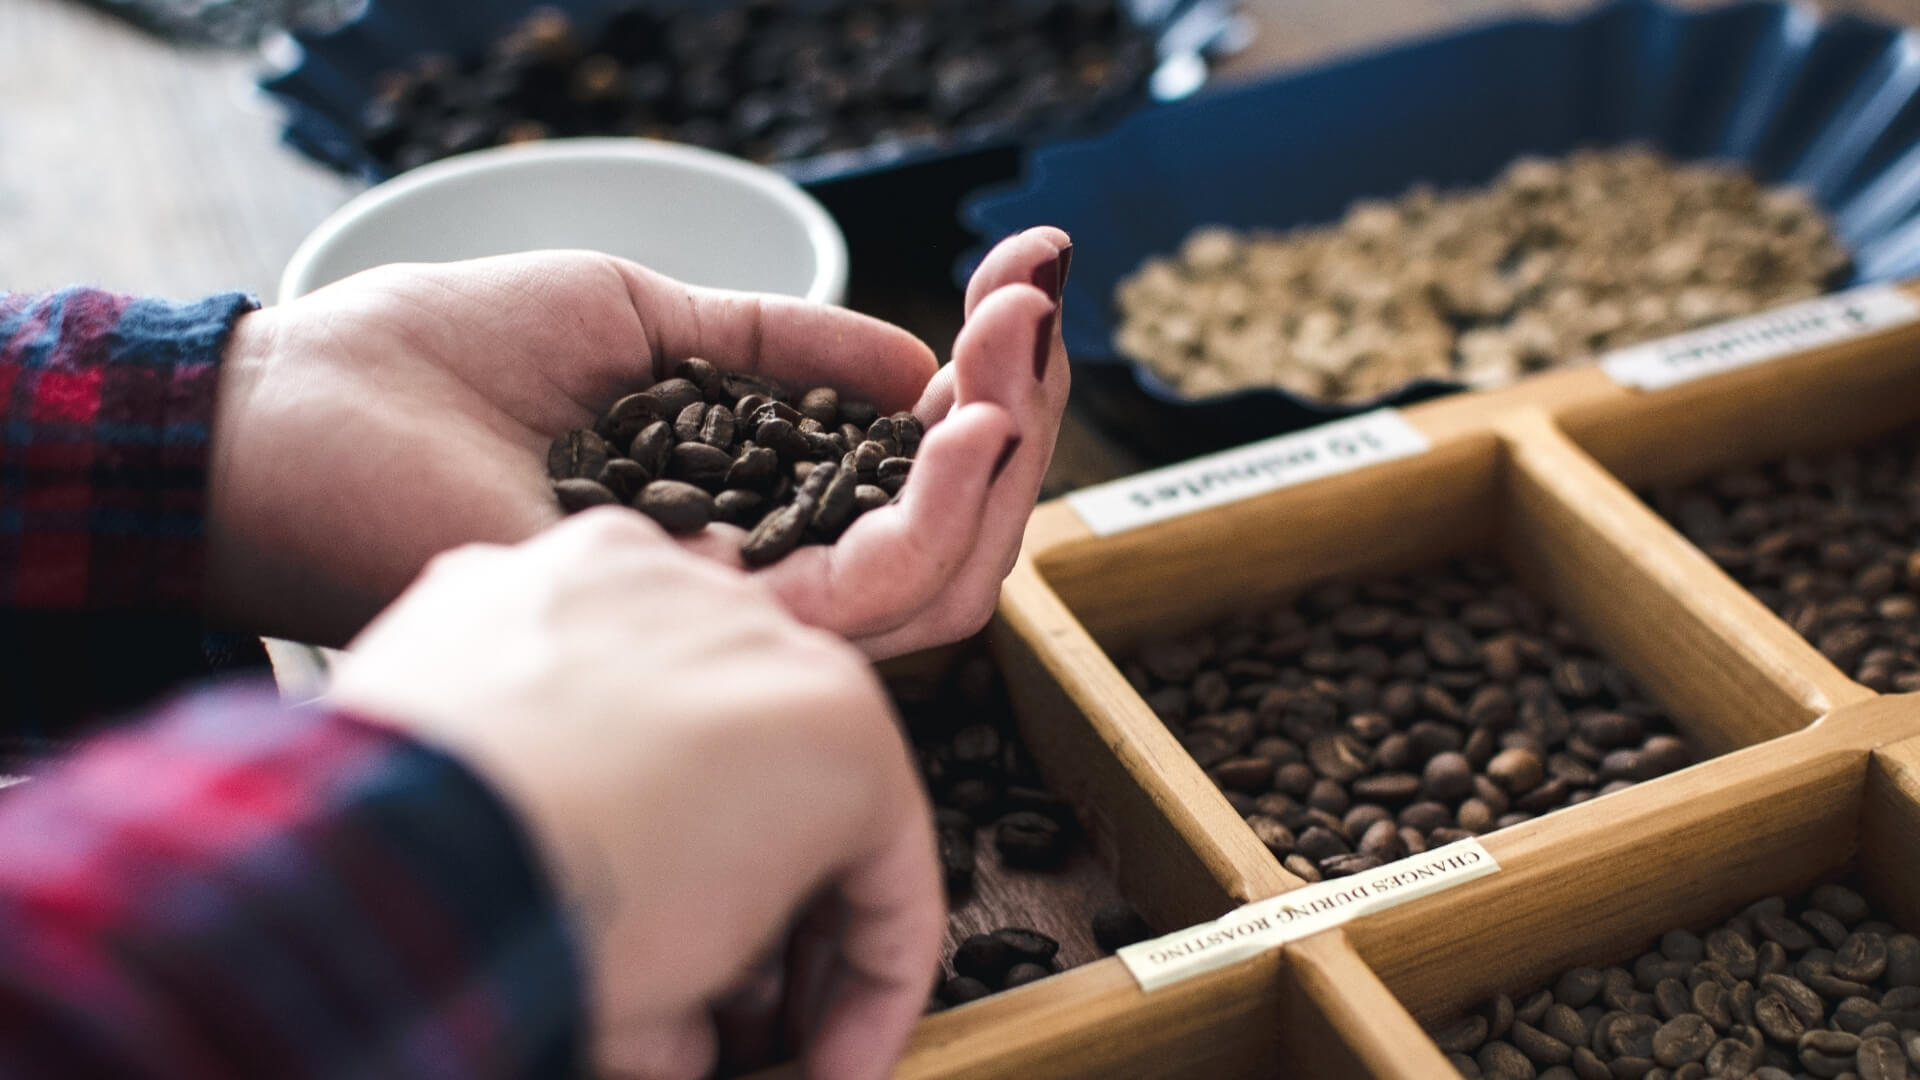 A hand holding arabica coffee beans. Different types of coffee beans are shown in the background